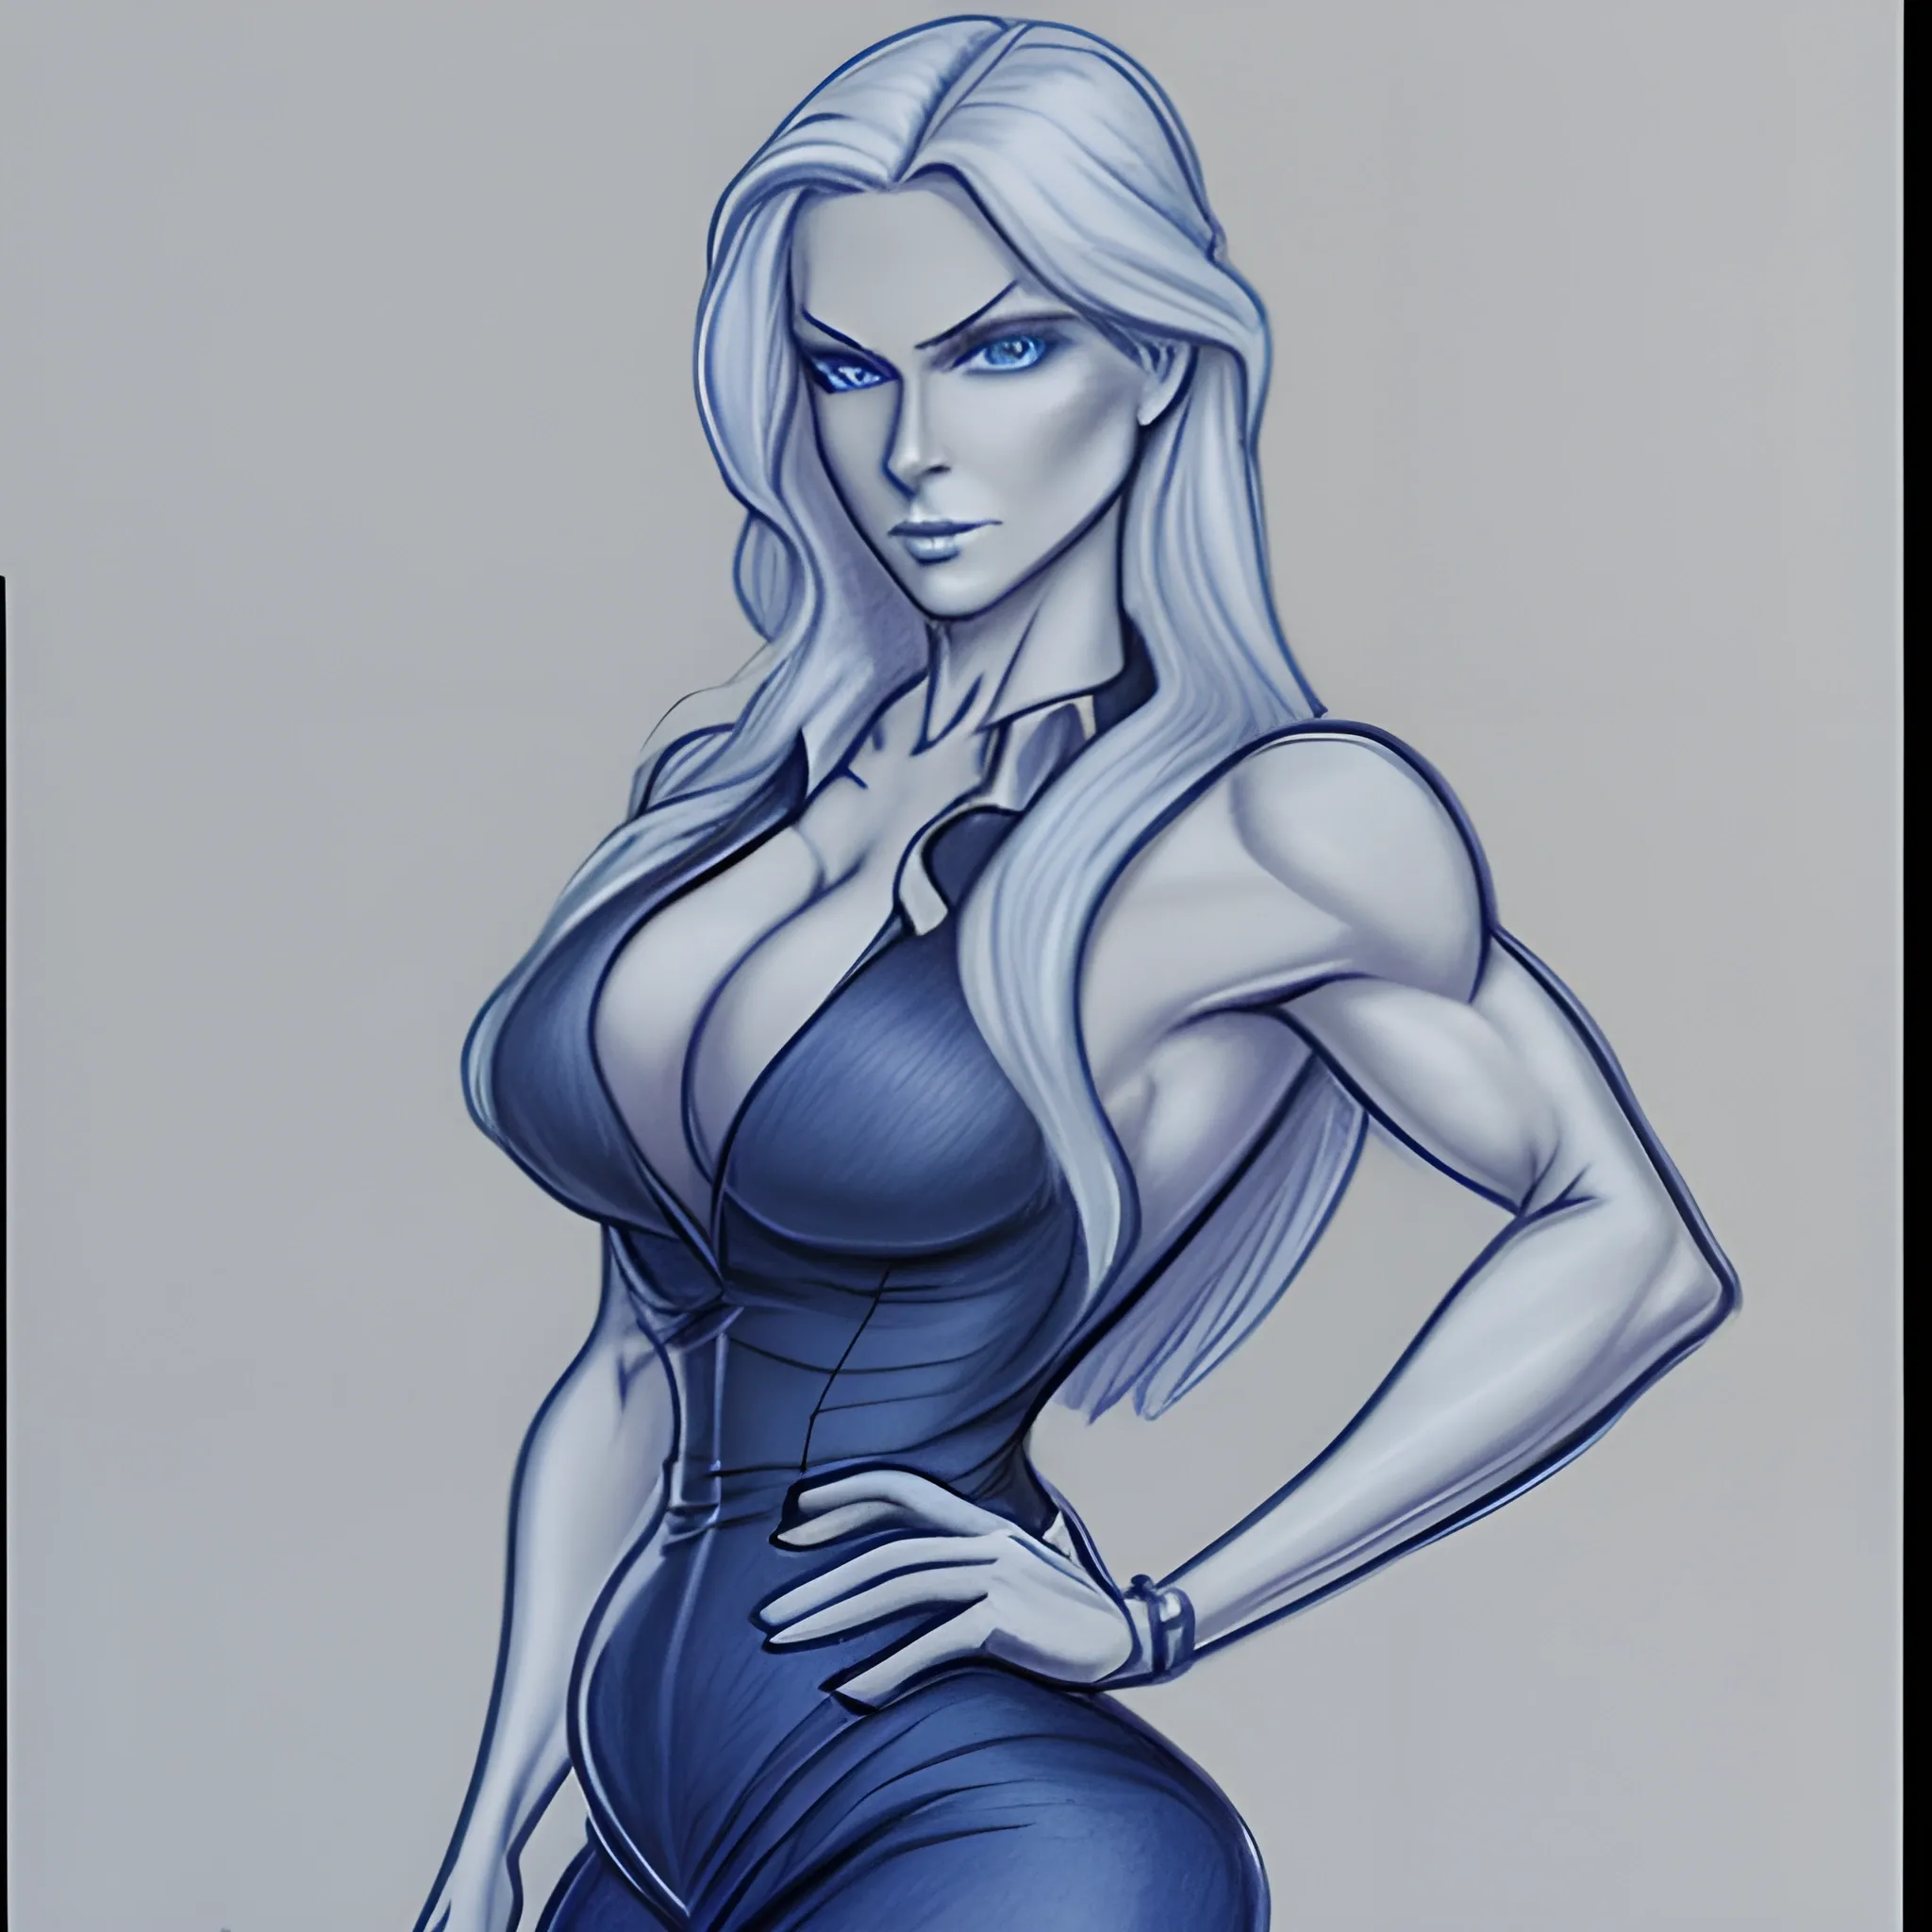 Blue eyes, slightly muscular, very long and thick blonde hair, dramatic hourglass figure, five-foot five-inches tall, wearing high-heels, business suit, pencil sketch
